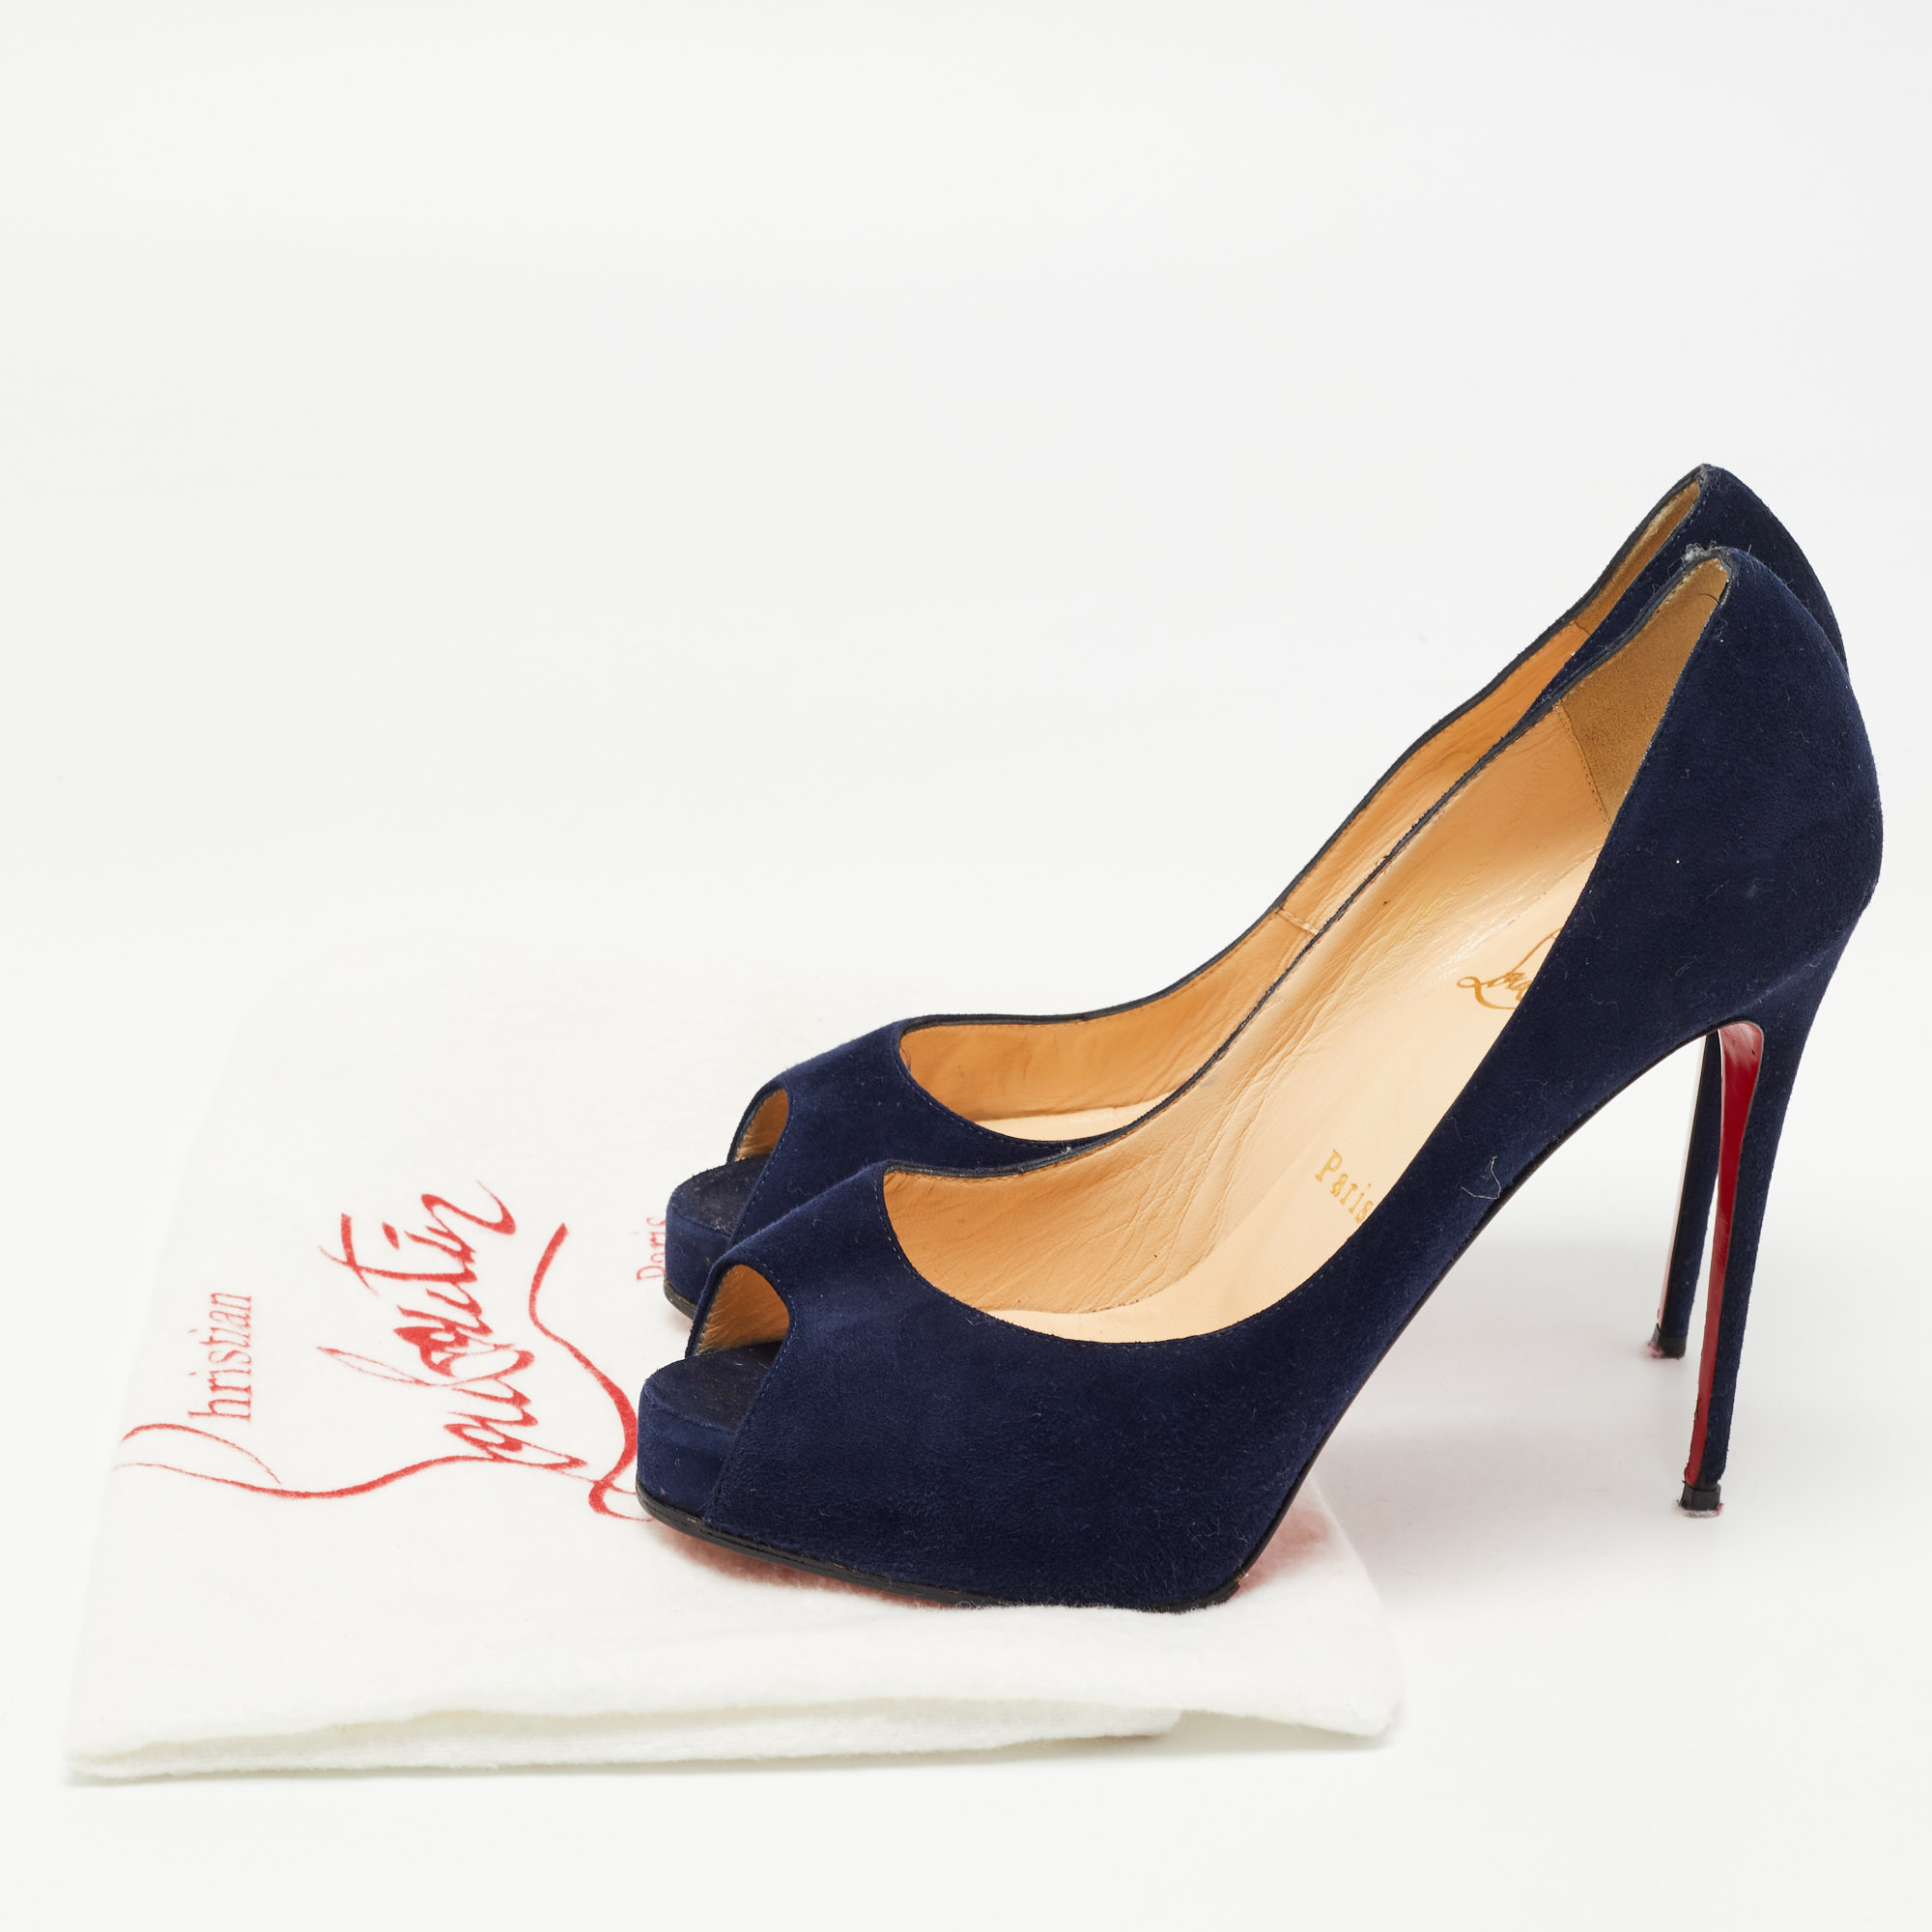 Christian Louboutin Navy Blue Suede Very Prive Pumps Size 37.5